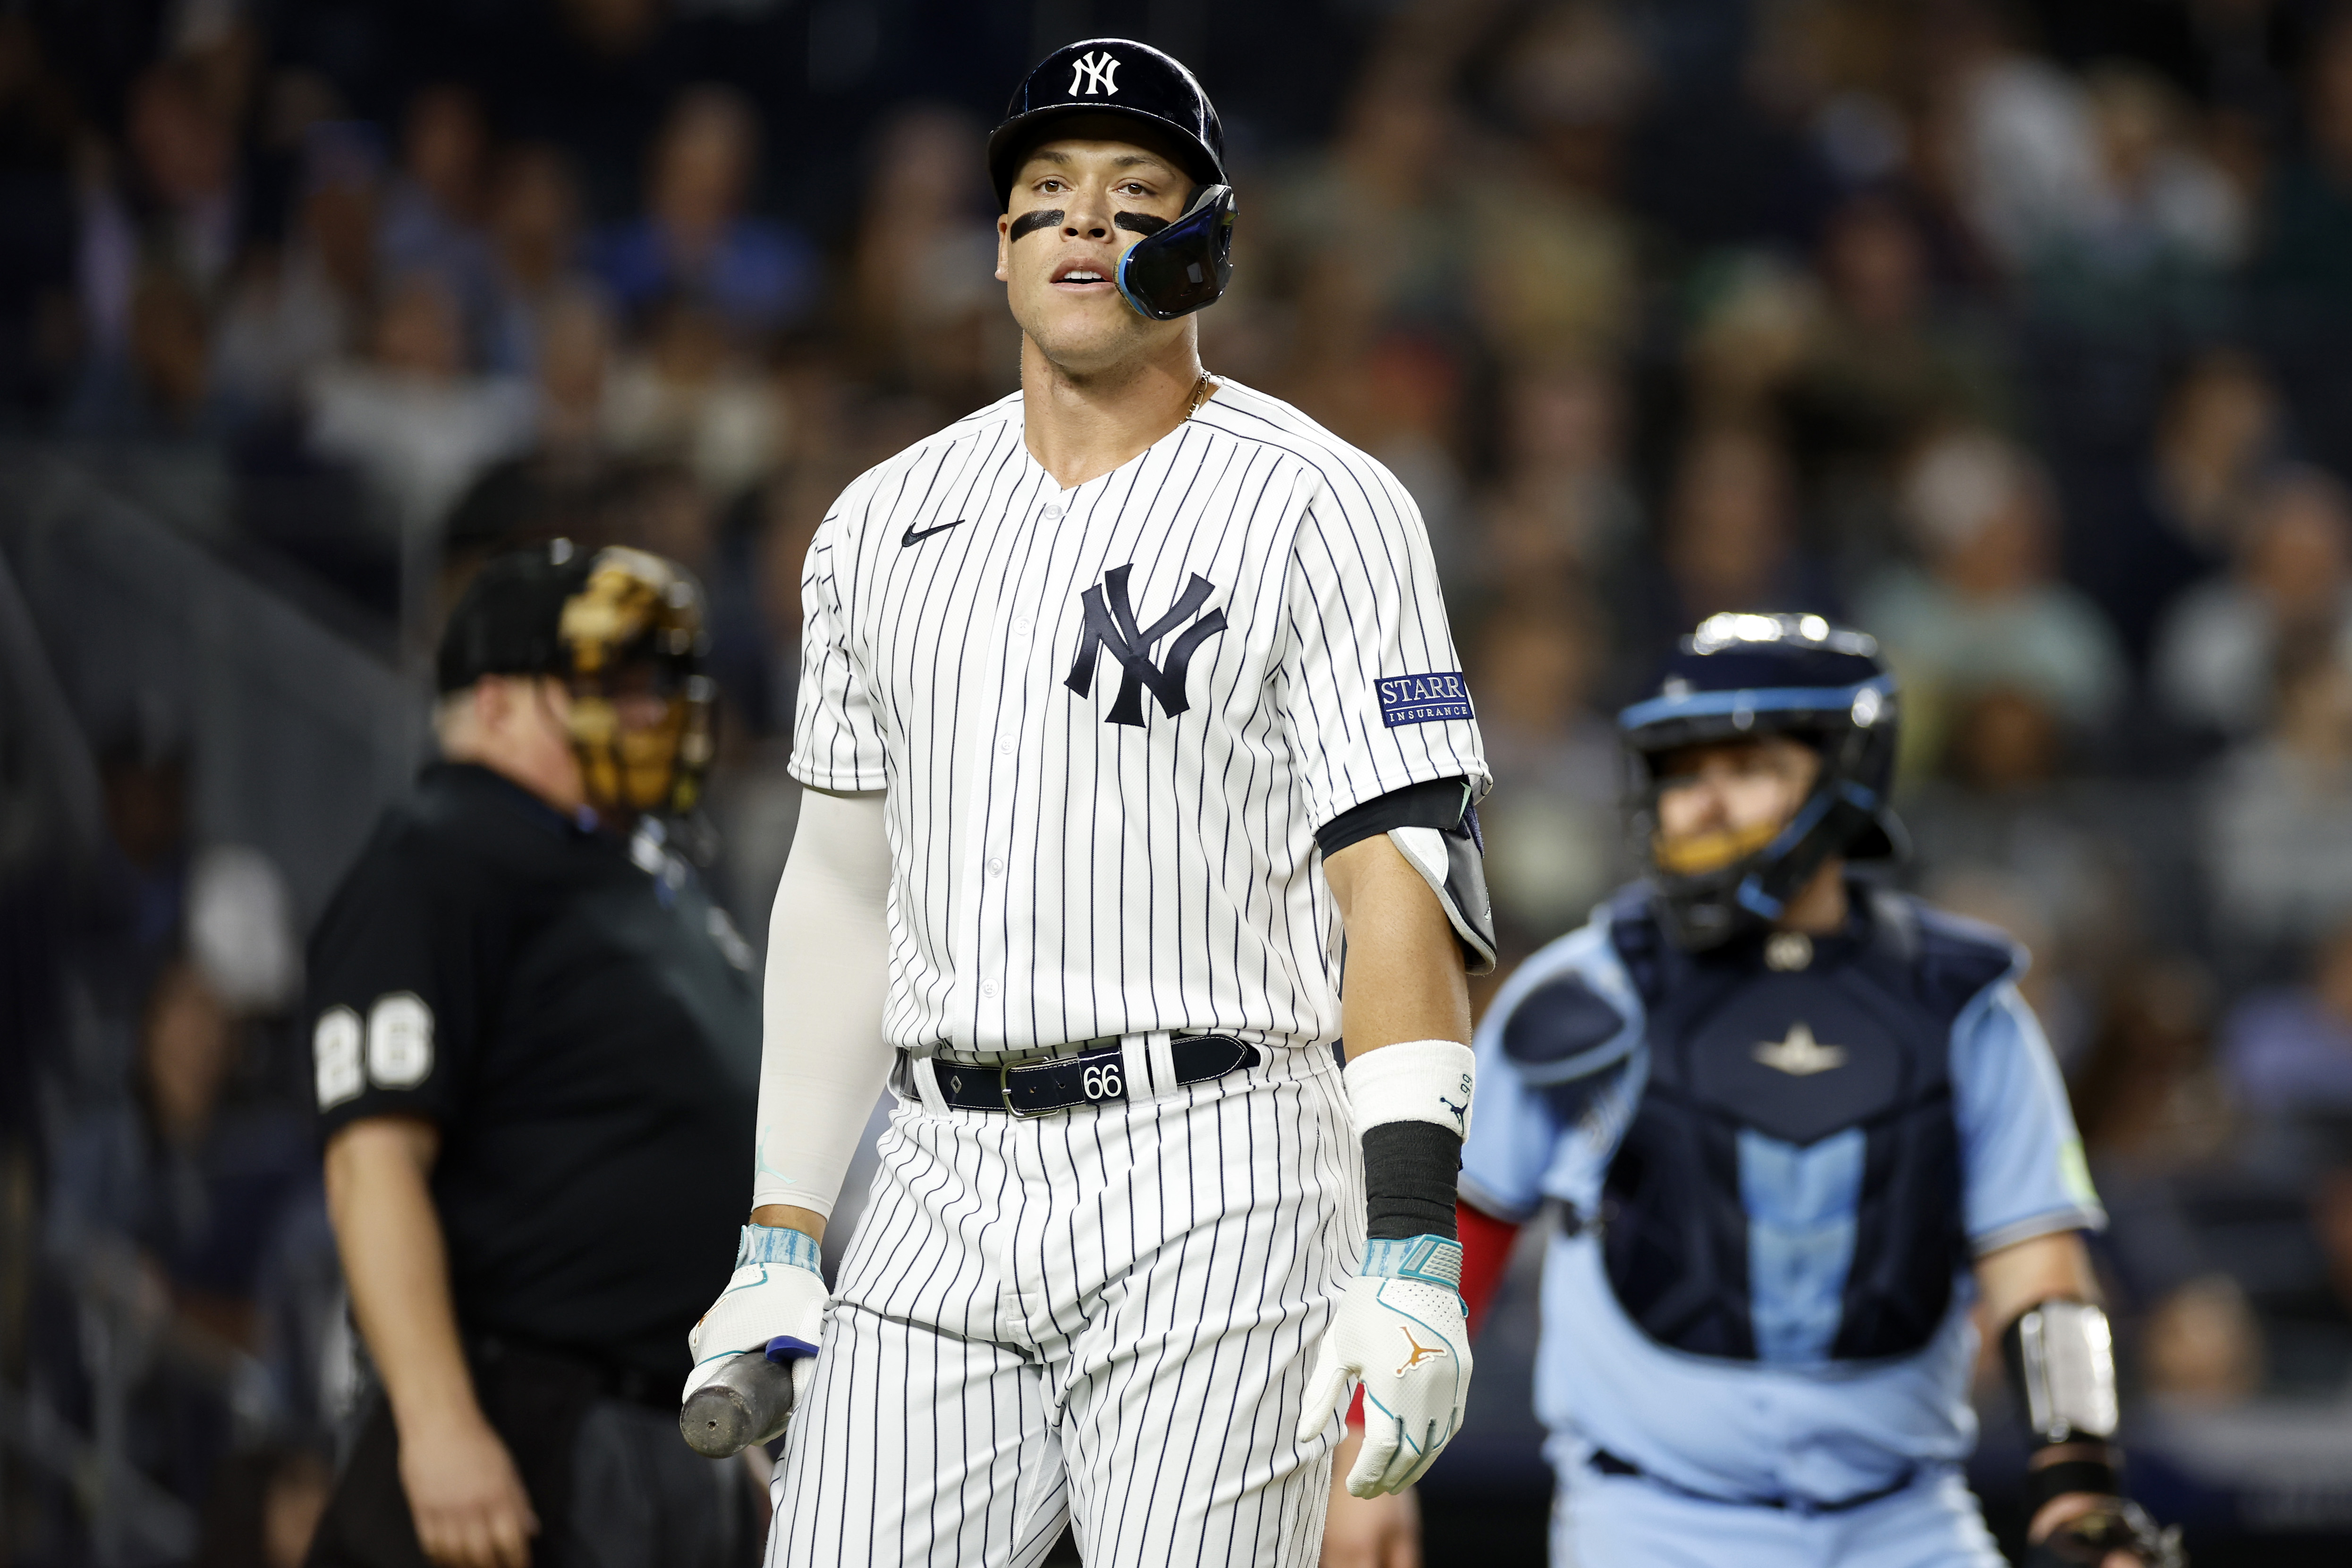 All the facts and details about Aaron Judge's brother, John Judge